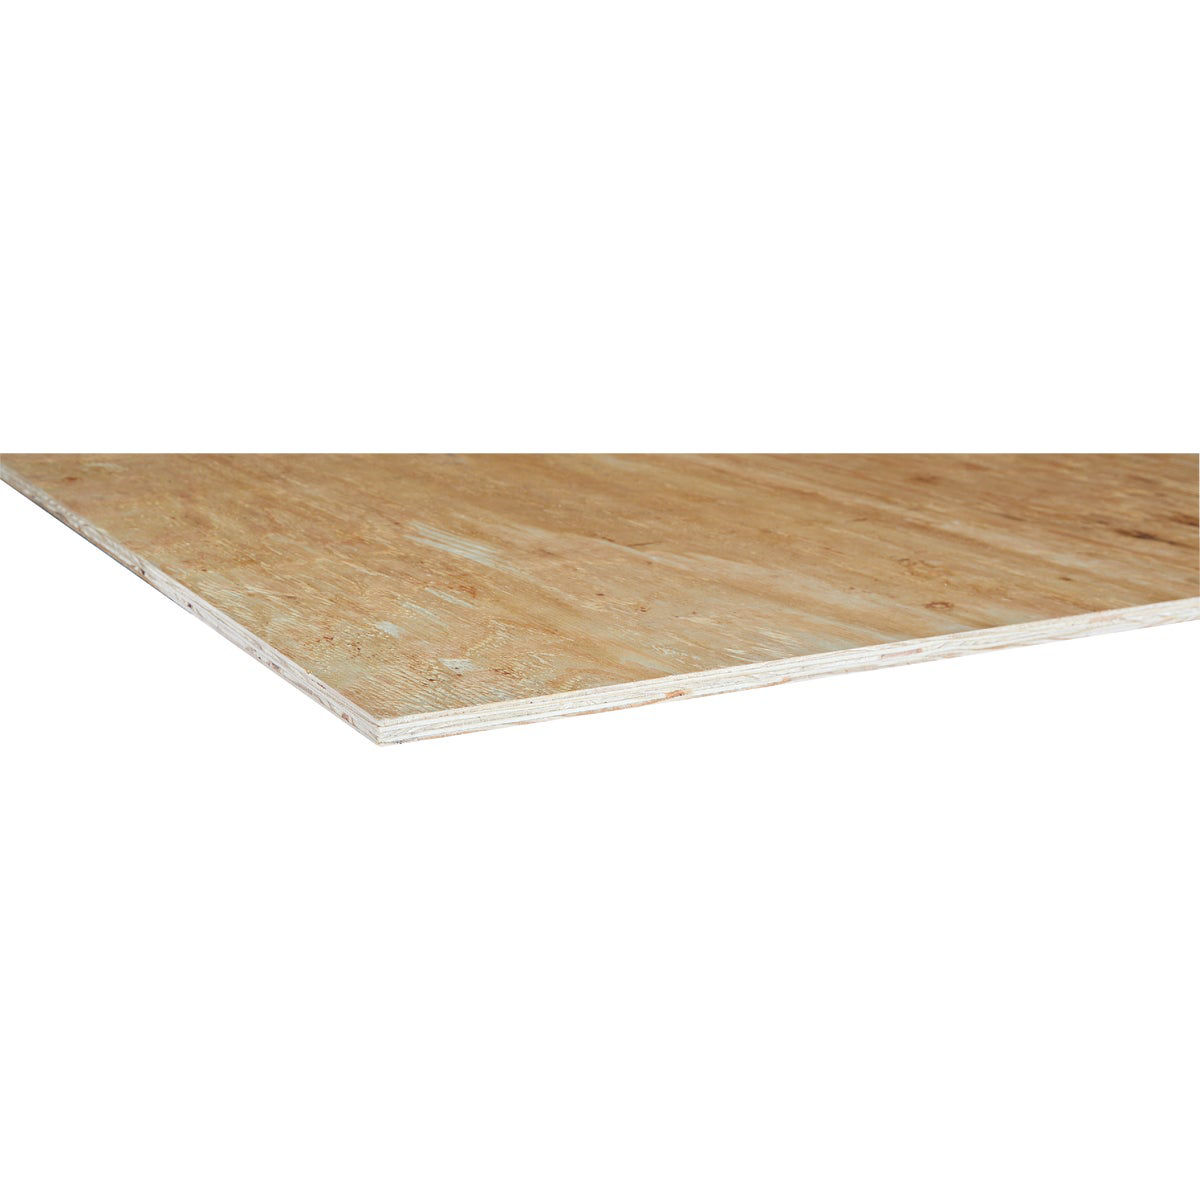 Pressure-Treated Plywood Rated Sheathing (Common: 23/32 in. x 4 ft